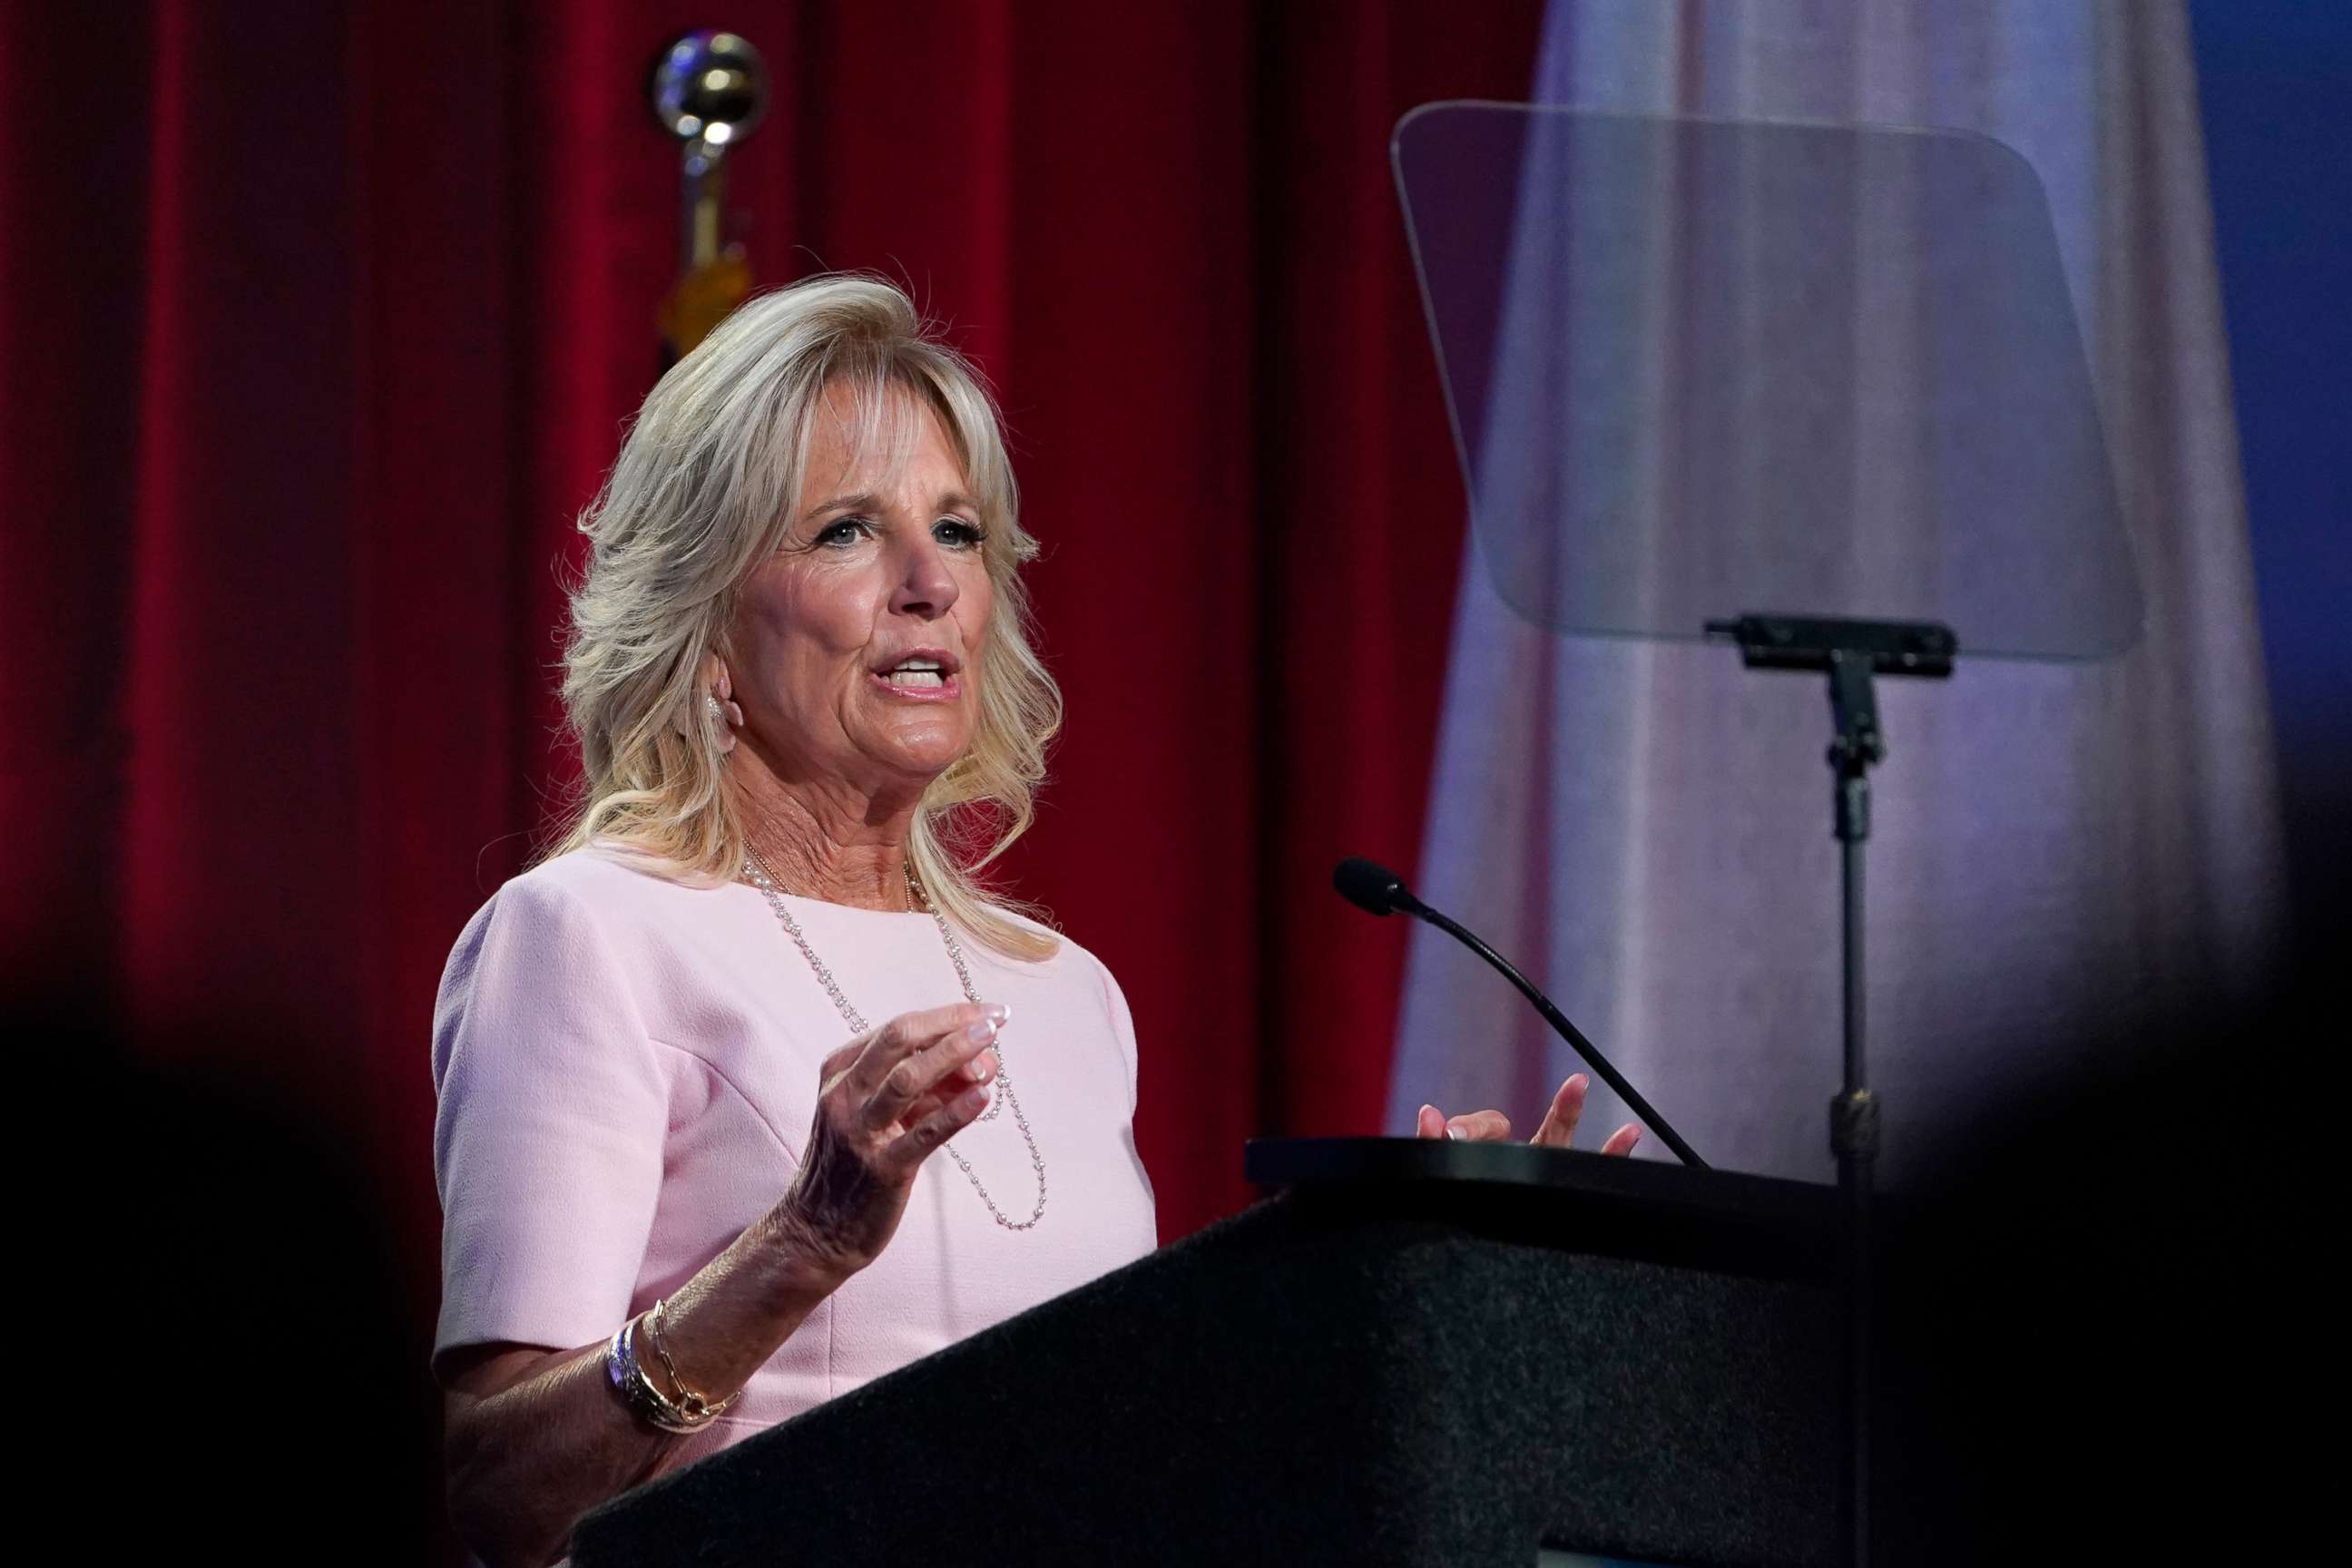 PHOTO: First lady Jill Biden speaks at the 125th Anniversary Convention of the National Parent Teacher Association (PTA) in National Harbor, Md., June 17, 2022.